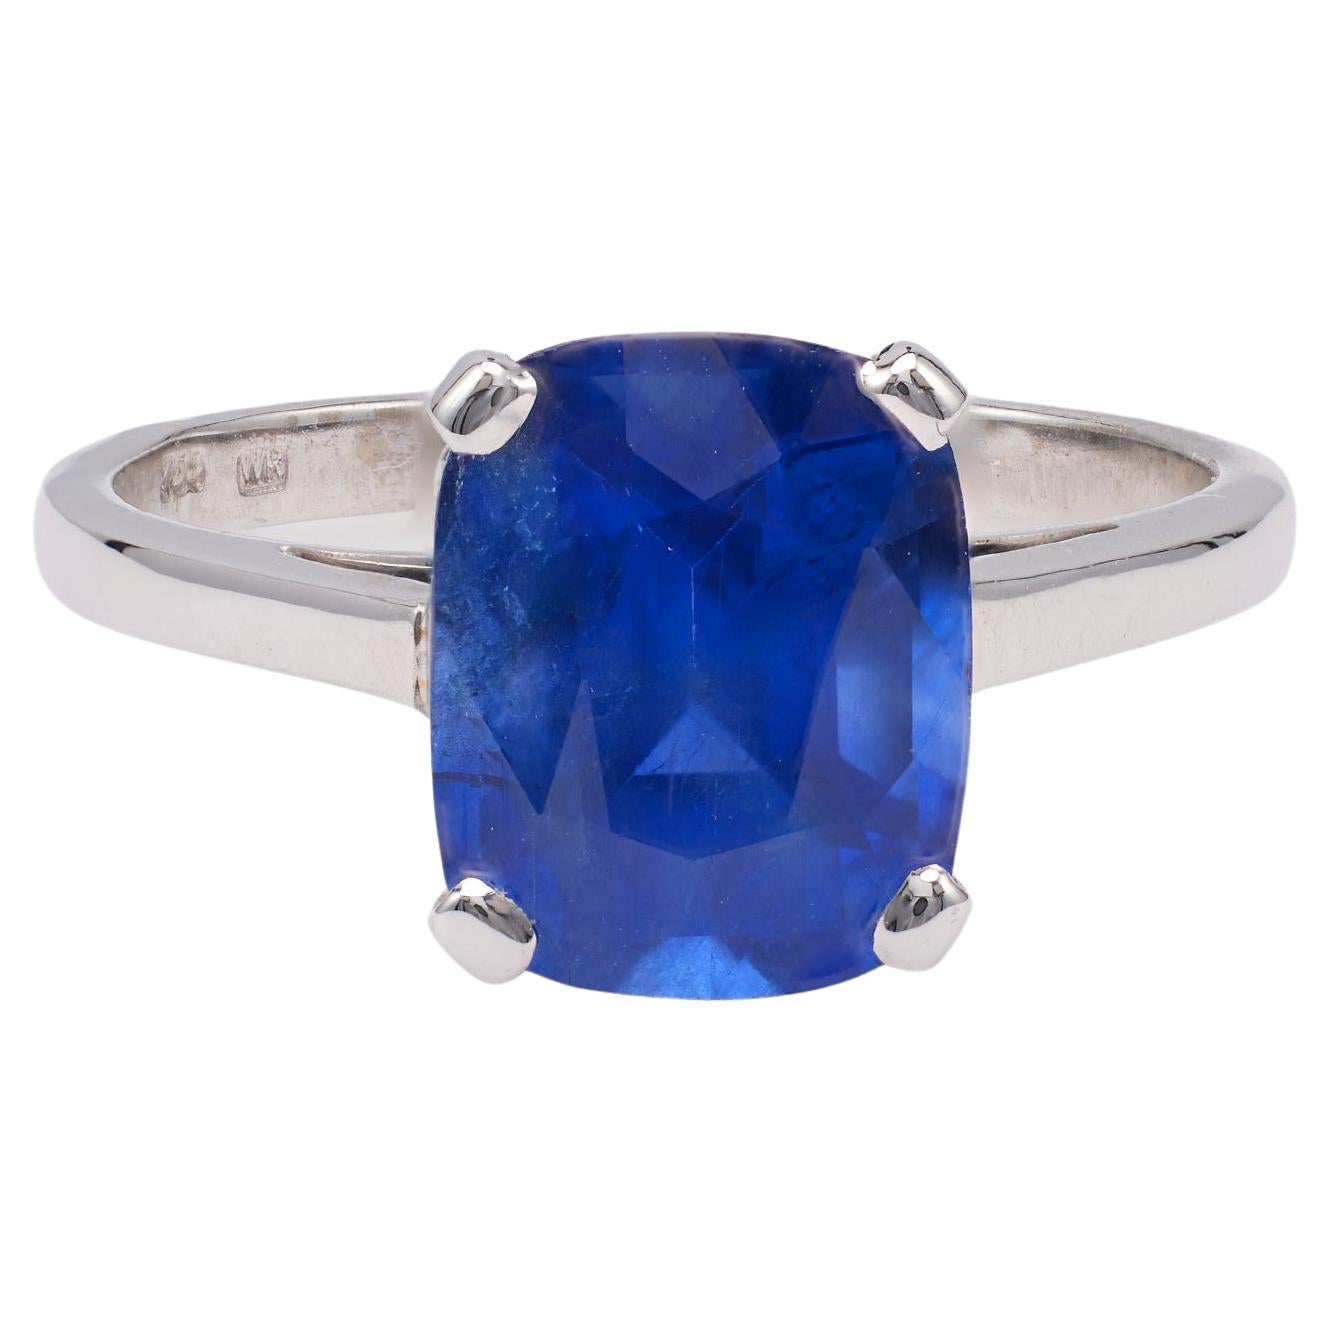 Vintage French GIA 4.24 Carat Ceylon Sapphire 18k White Gold Solitaire Ring For Sale